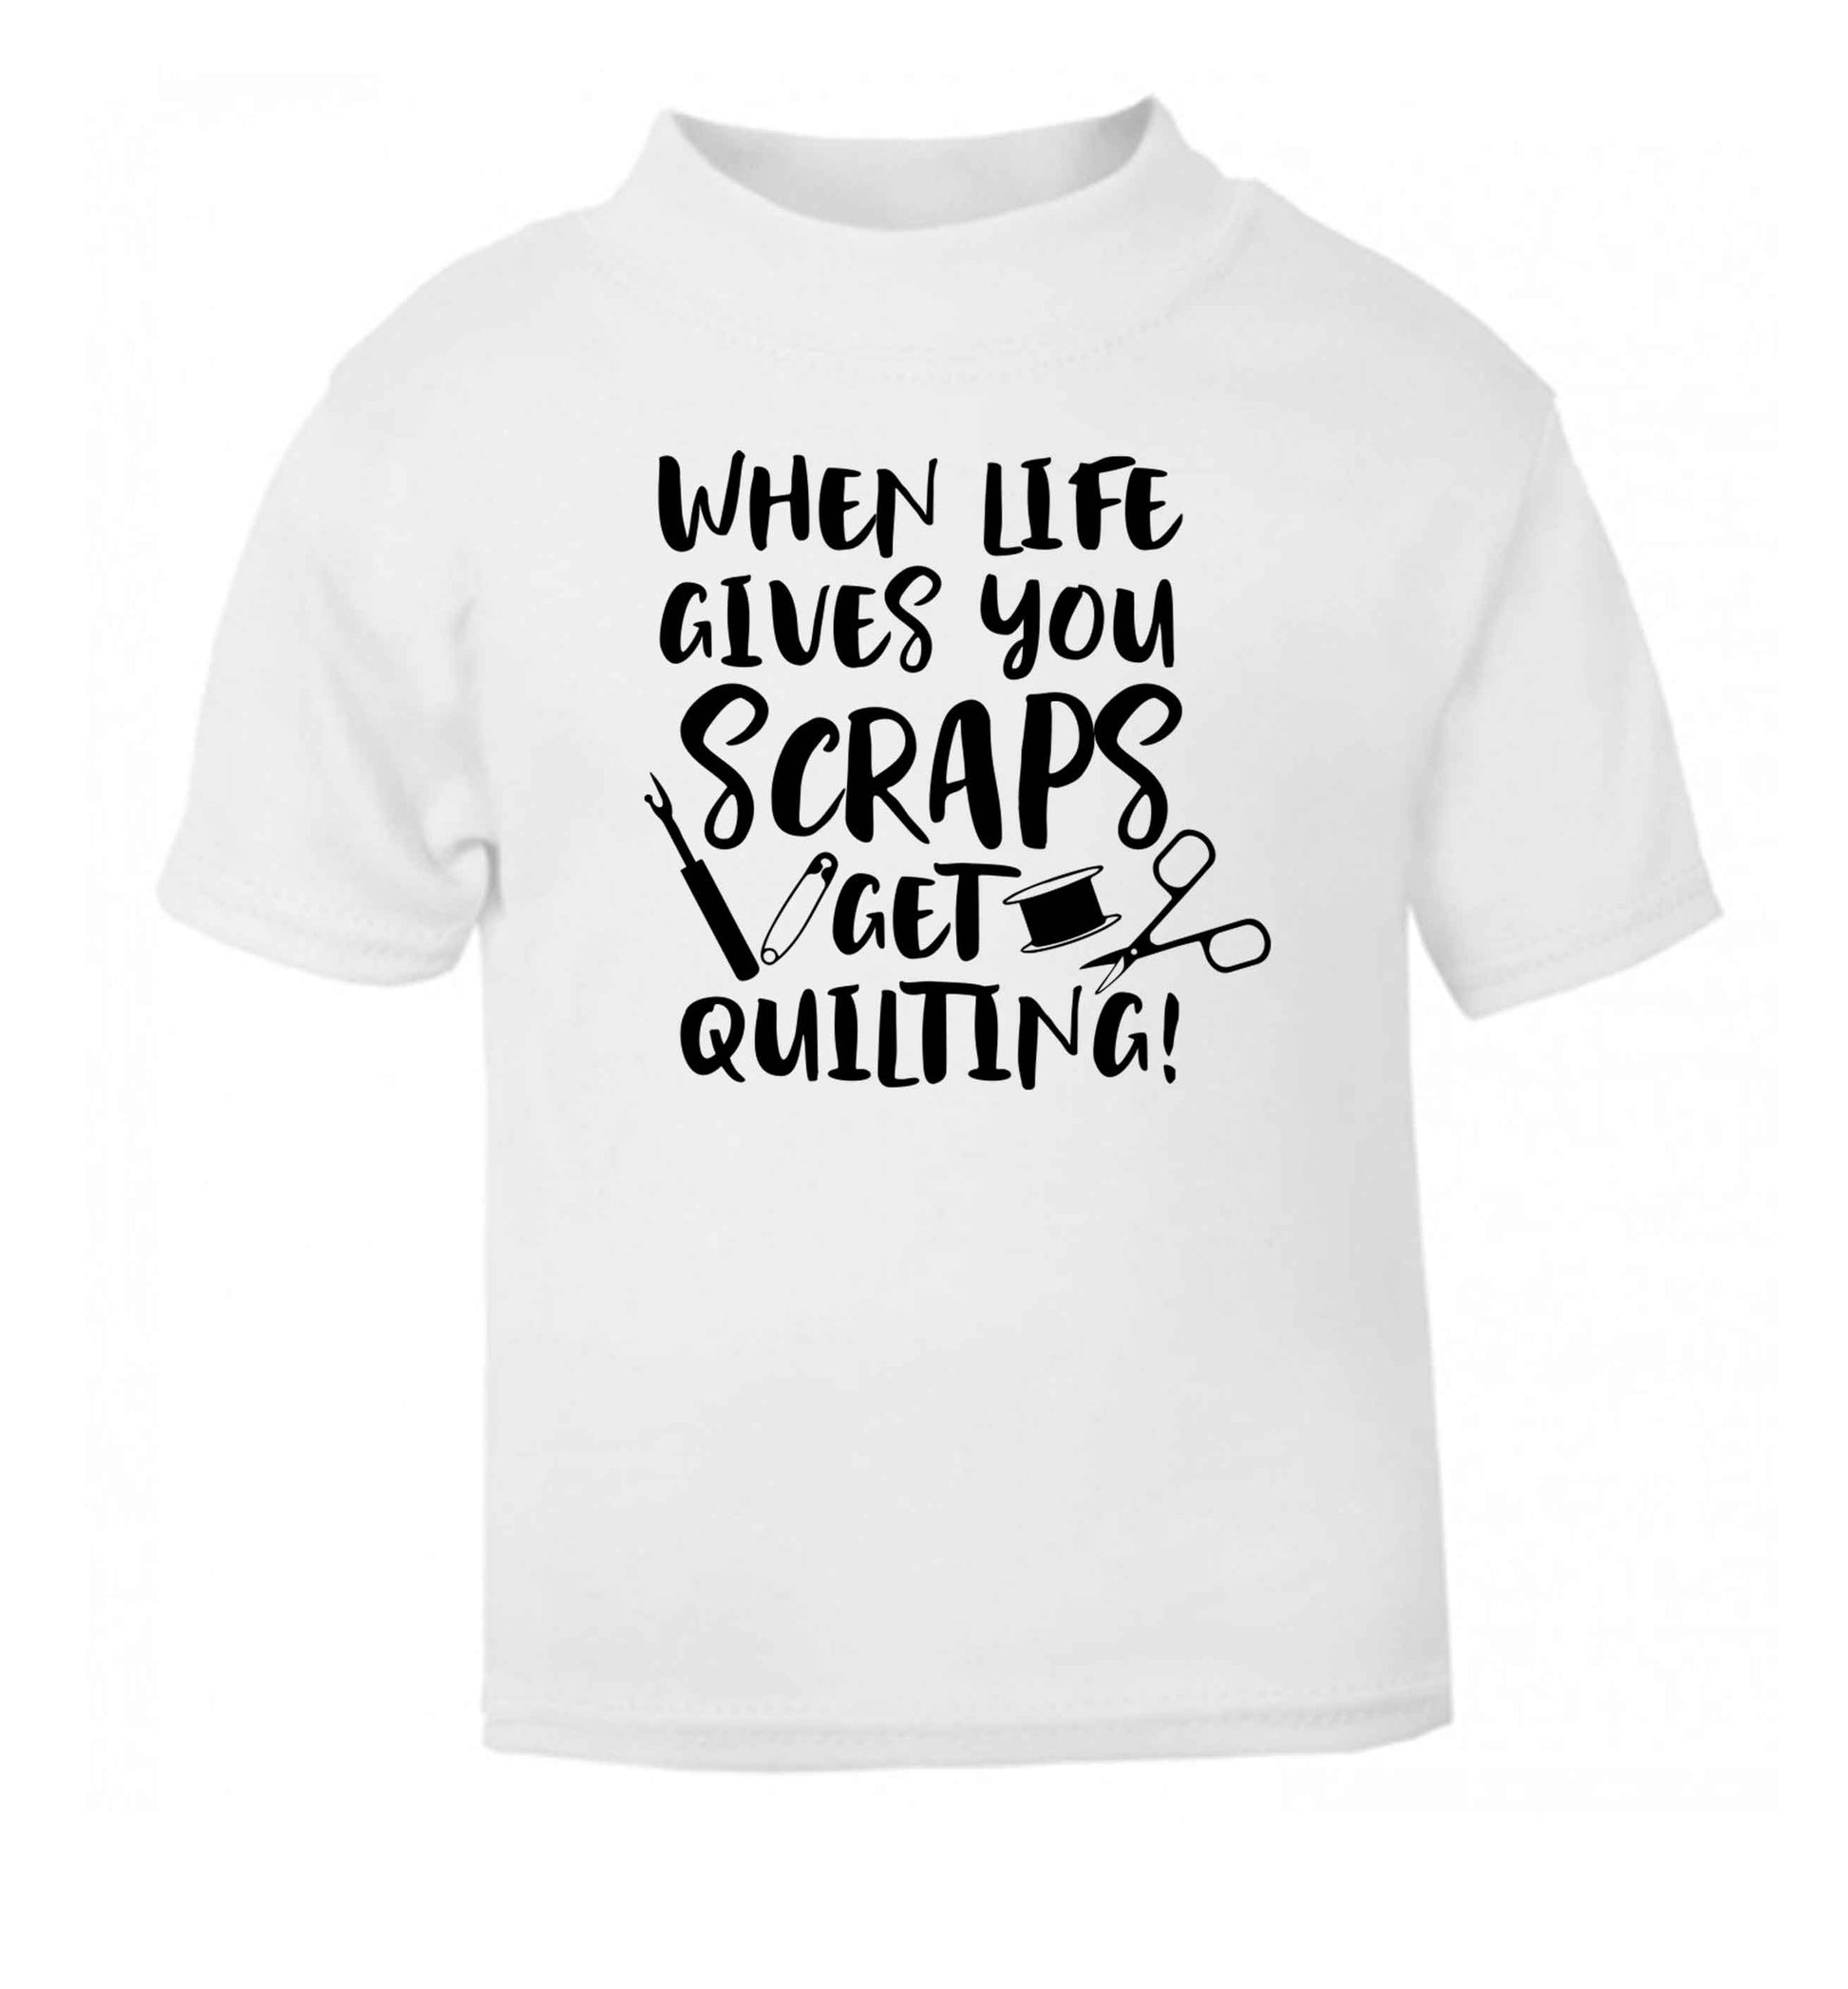 When life gives you scraps get quilting! white Baby Toddler Tshirt 2 Years